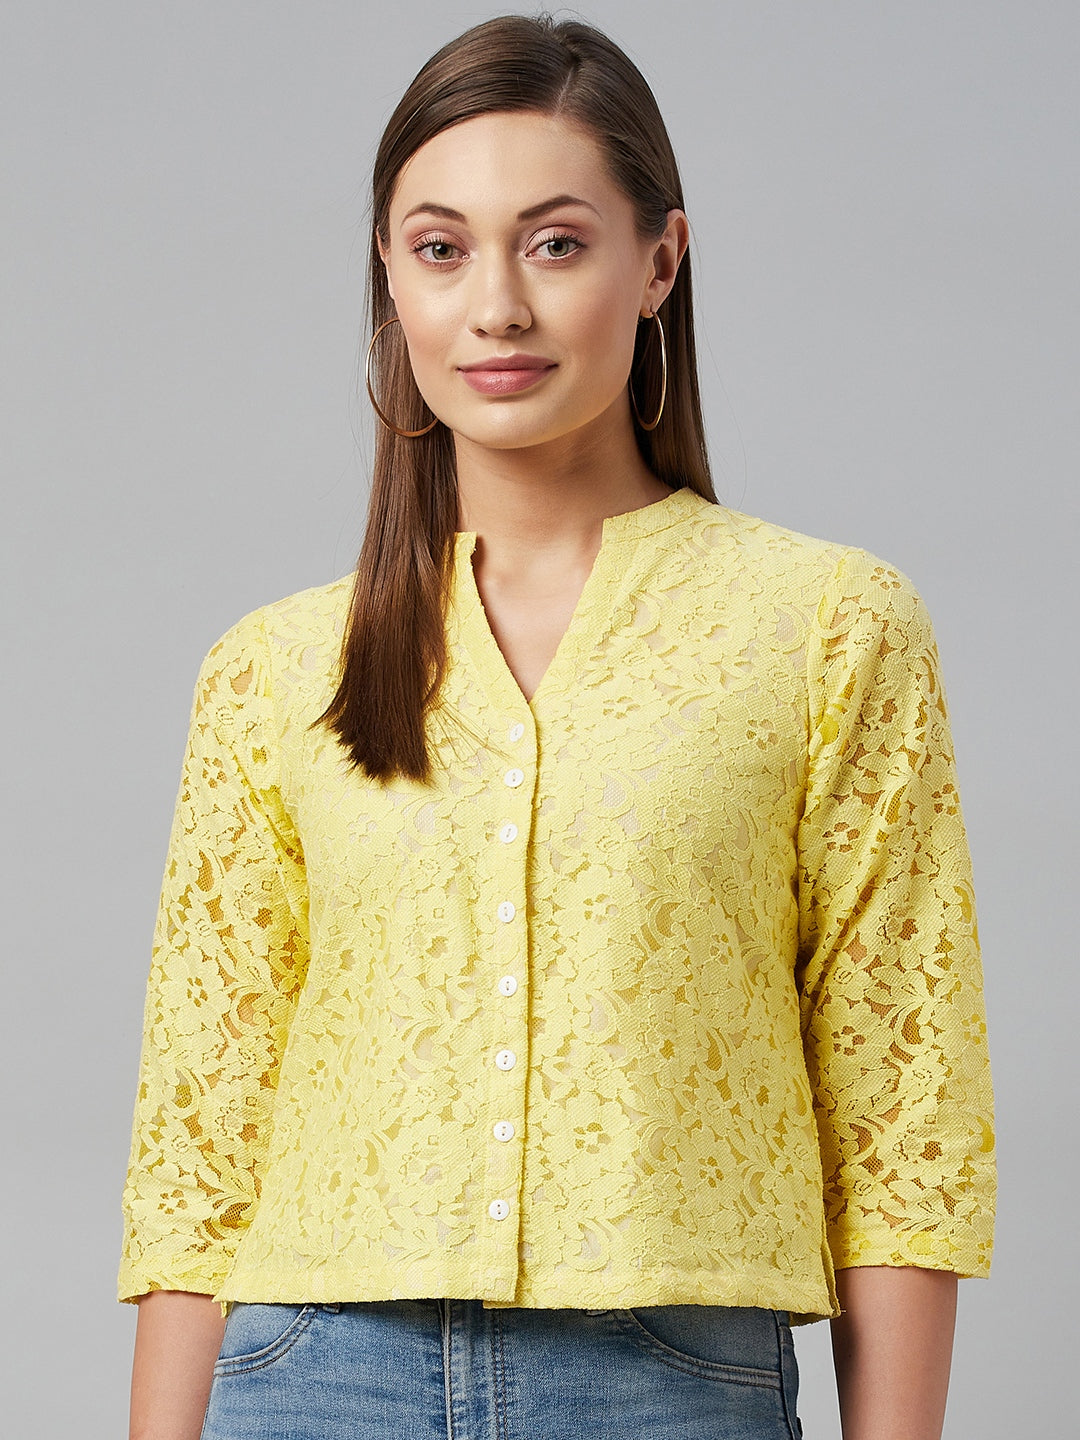 Ayaany Women Yellow Net Lace Cotton Lined  Top